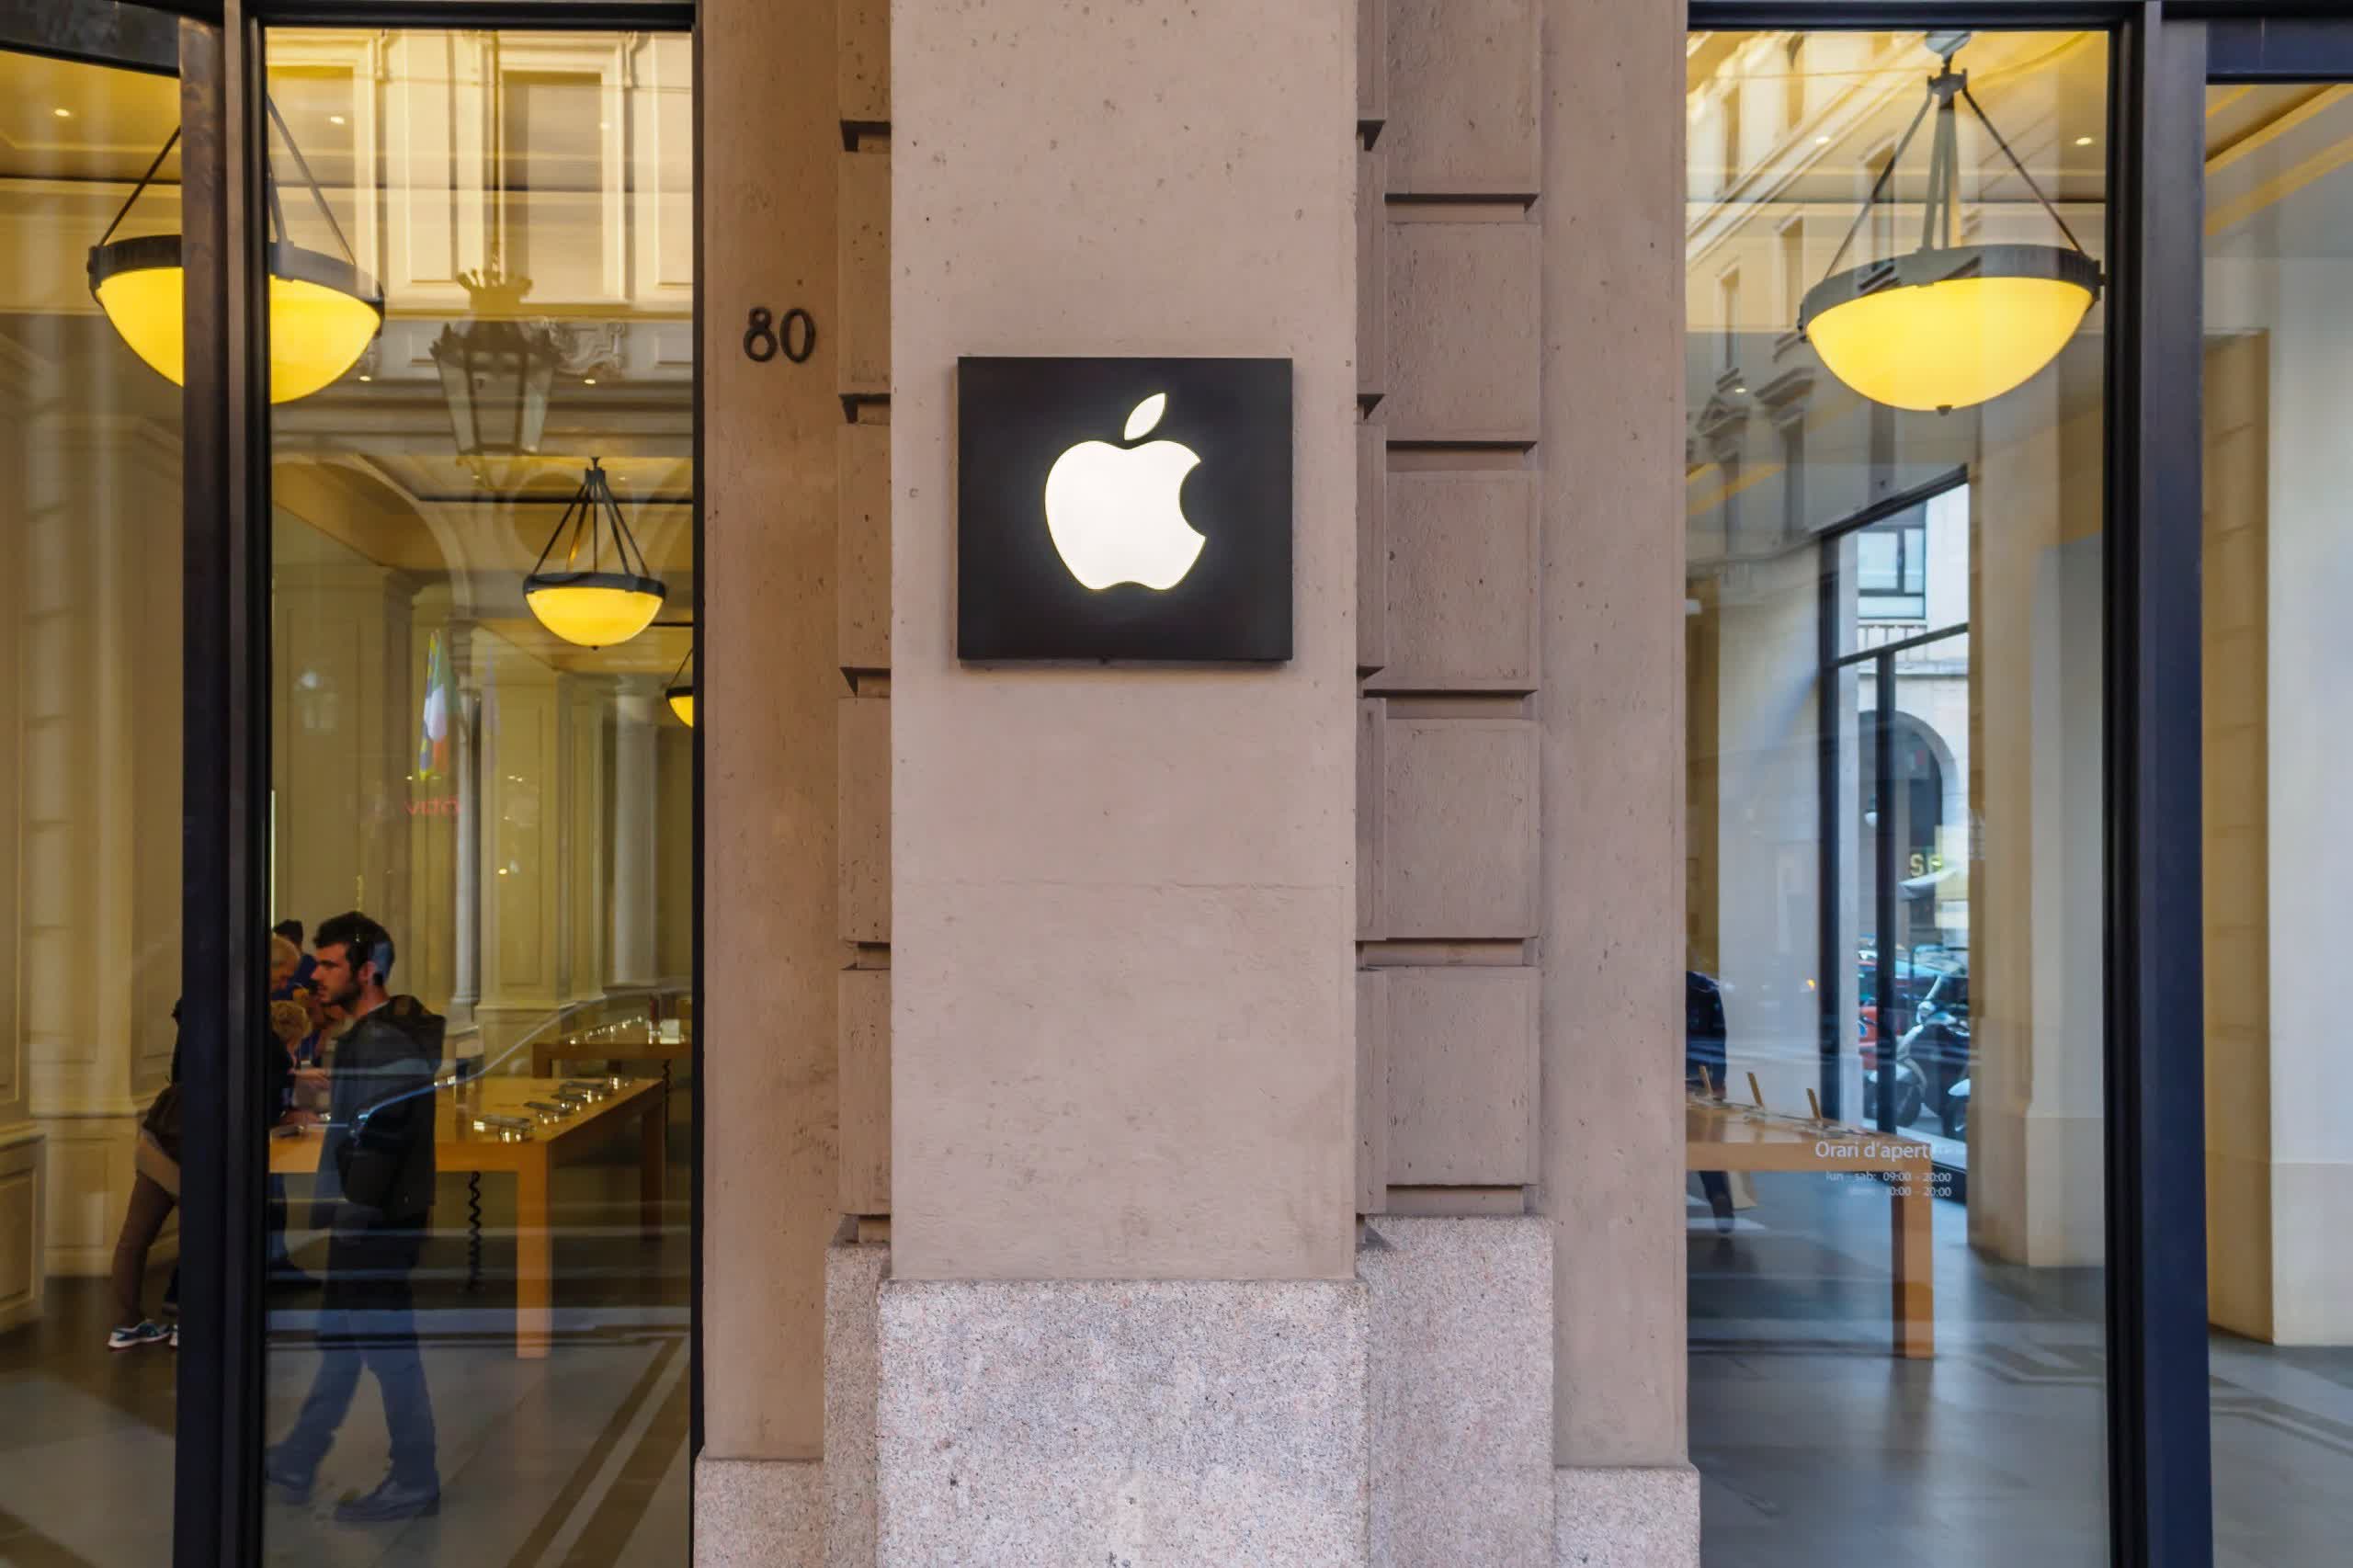 Apple's policies violate employee rights, US officials find